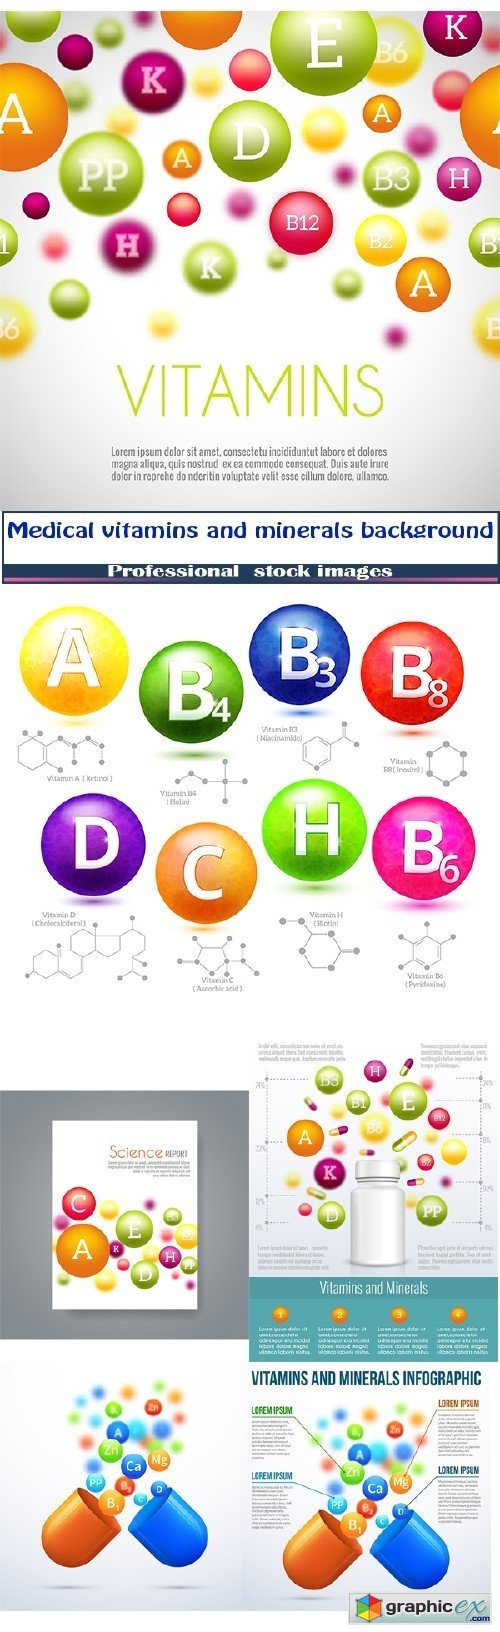 Medical vitamins and minerals background